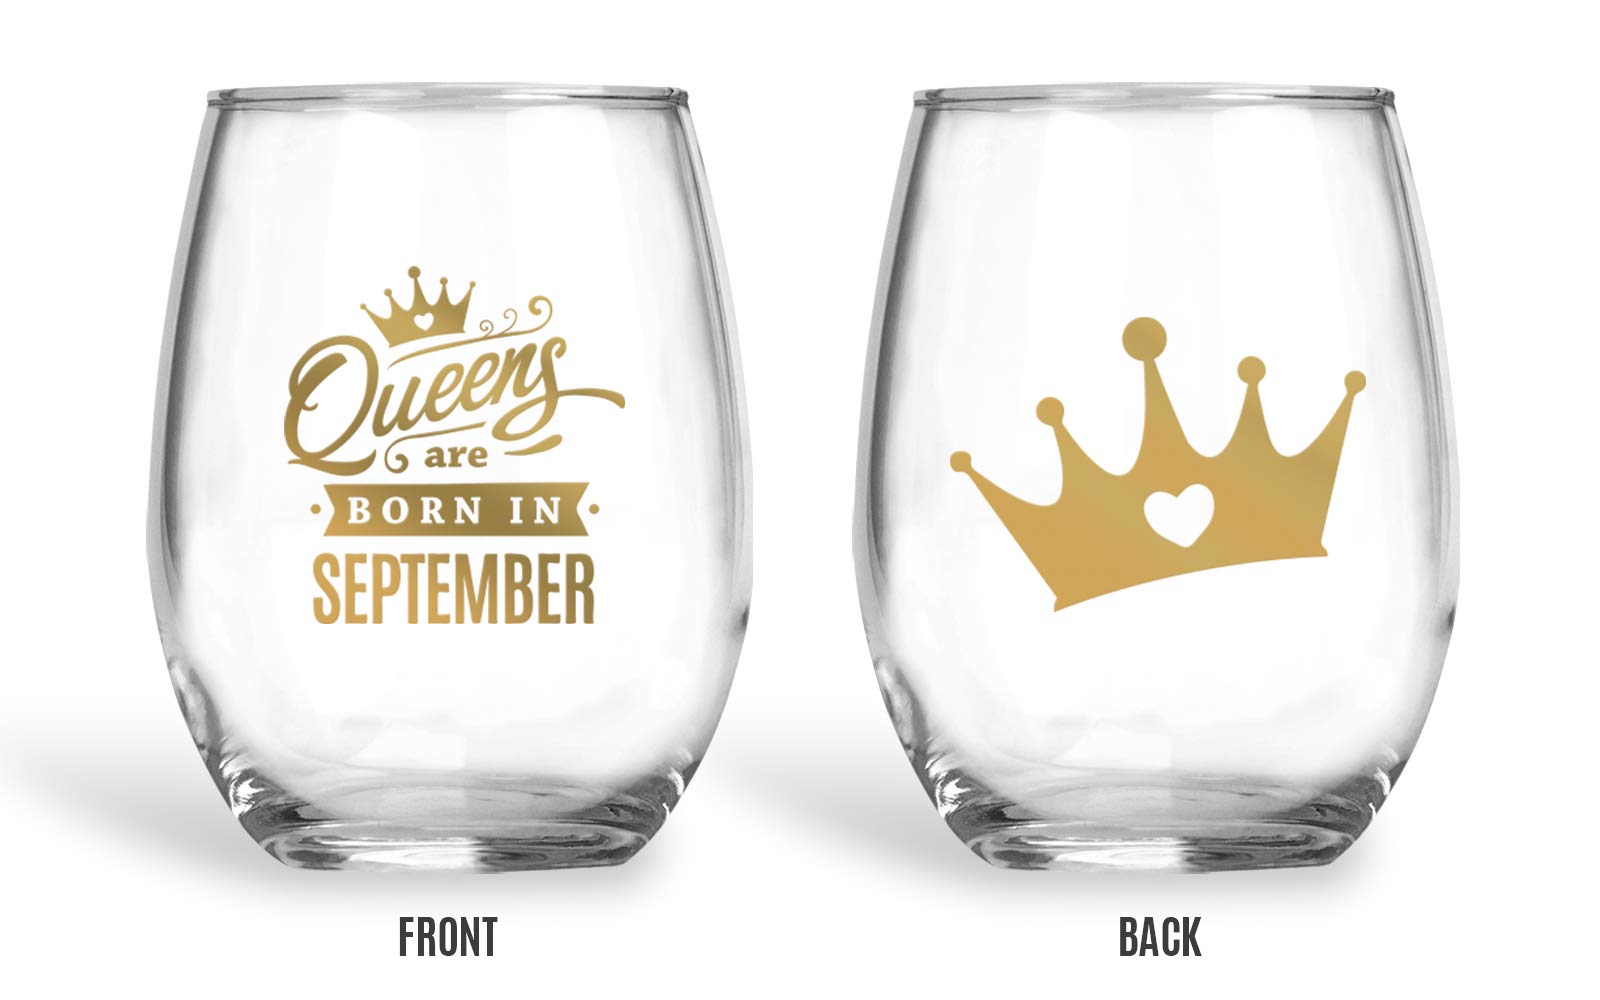 Bad Bananas September Birthday Gifts For Women - Queens Are Born In September 21 oz Stemless Wine Glass - Virgo or Libra Zodiac Sign Gifts for Her Happy Birthday Gifts for Moms, Best Friends, Sisters